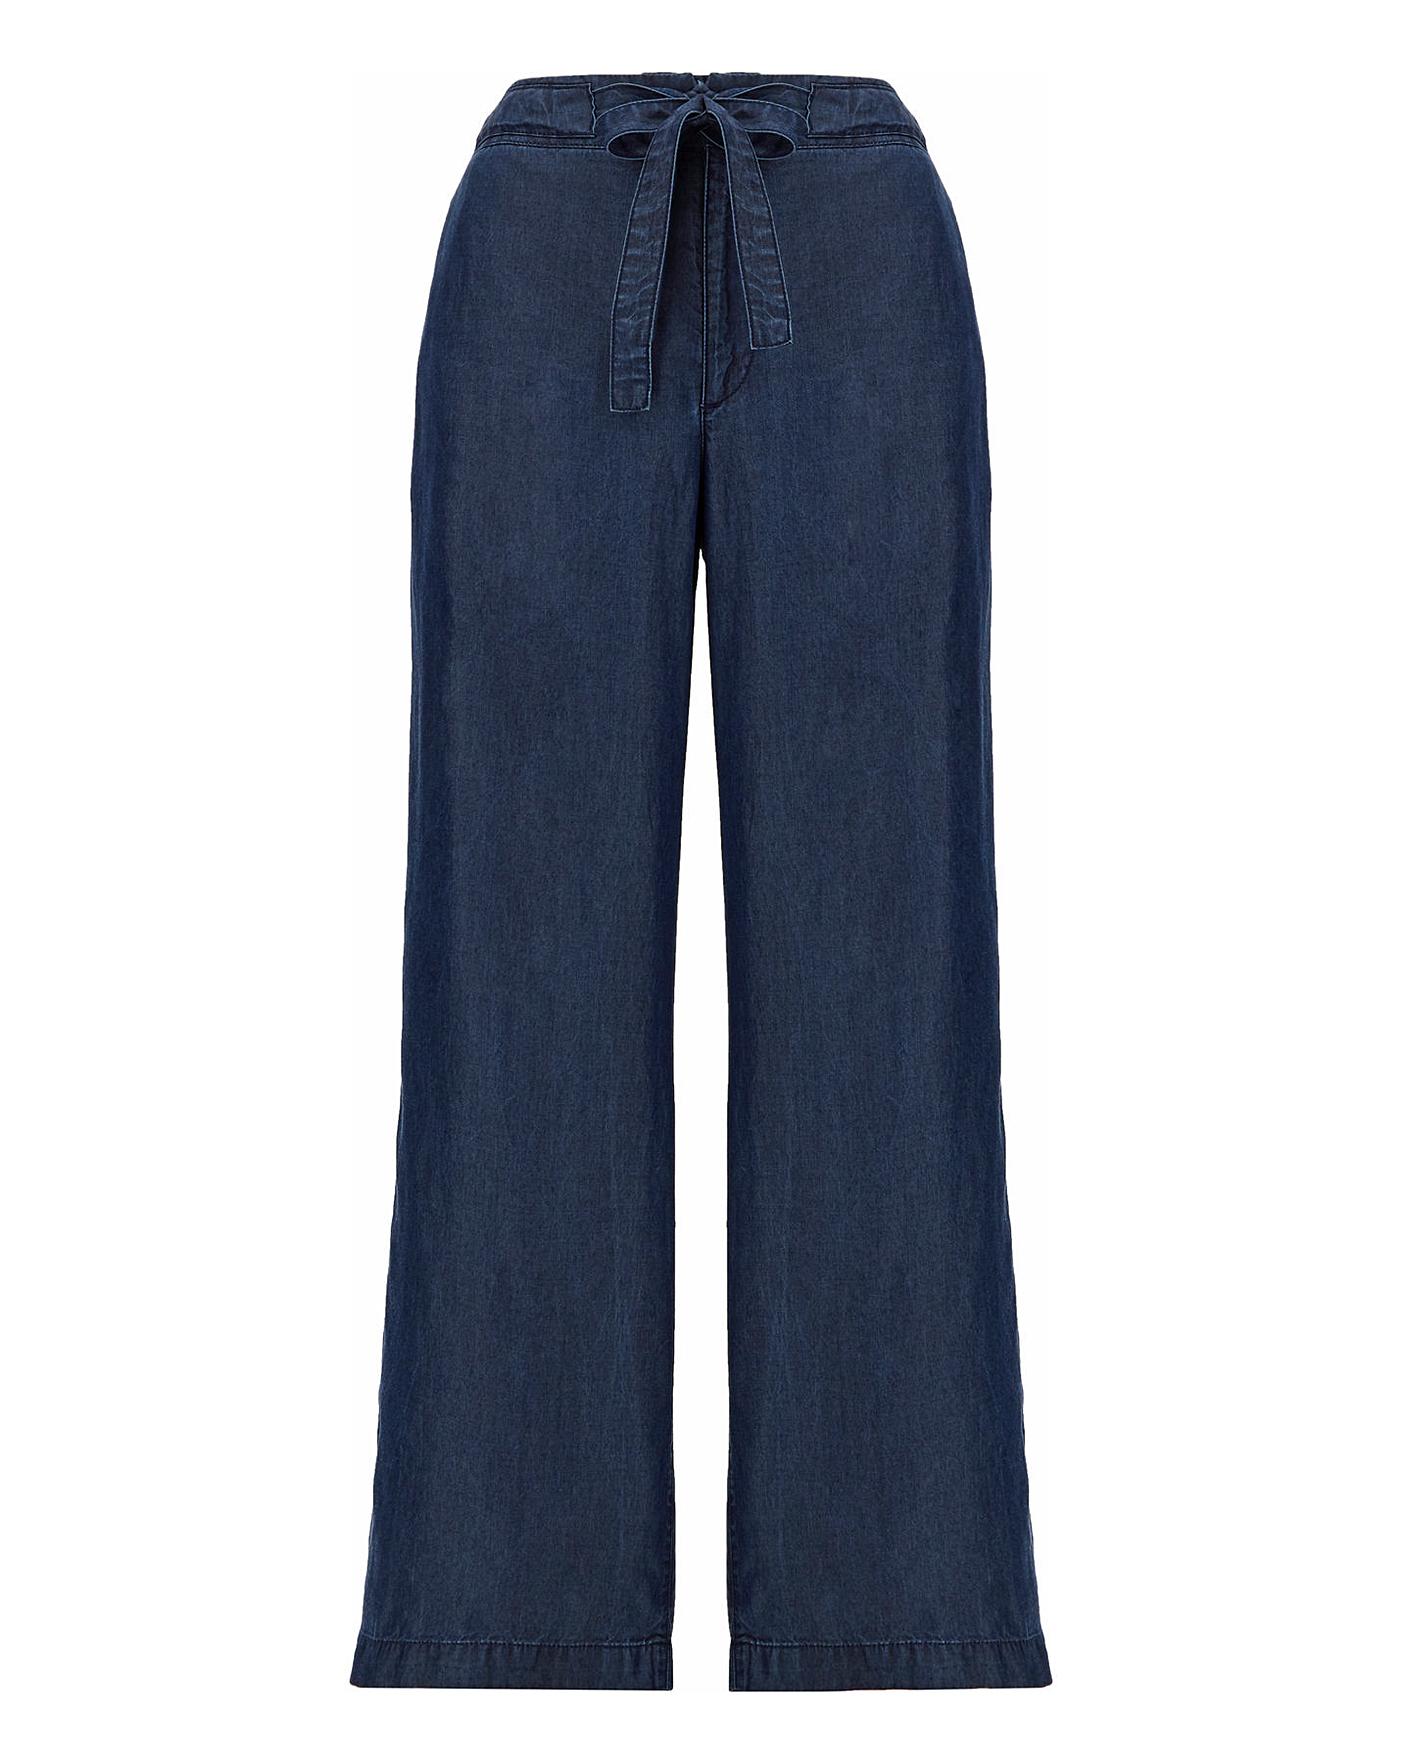 Indigo Lyocell Belted Wide Leg Trousers | Simply Be